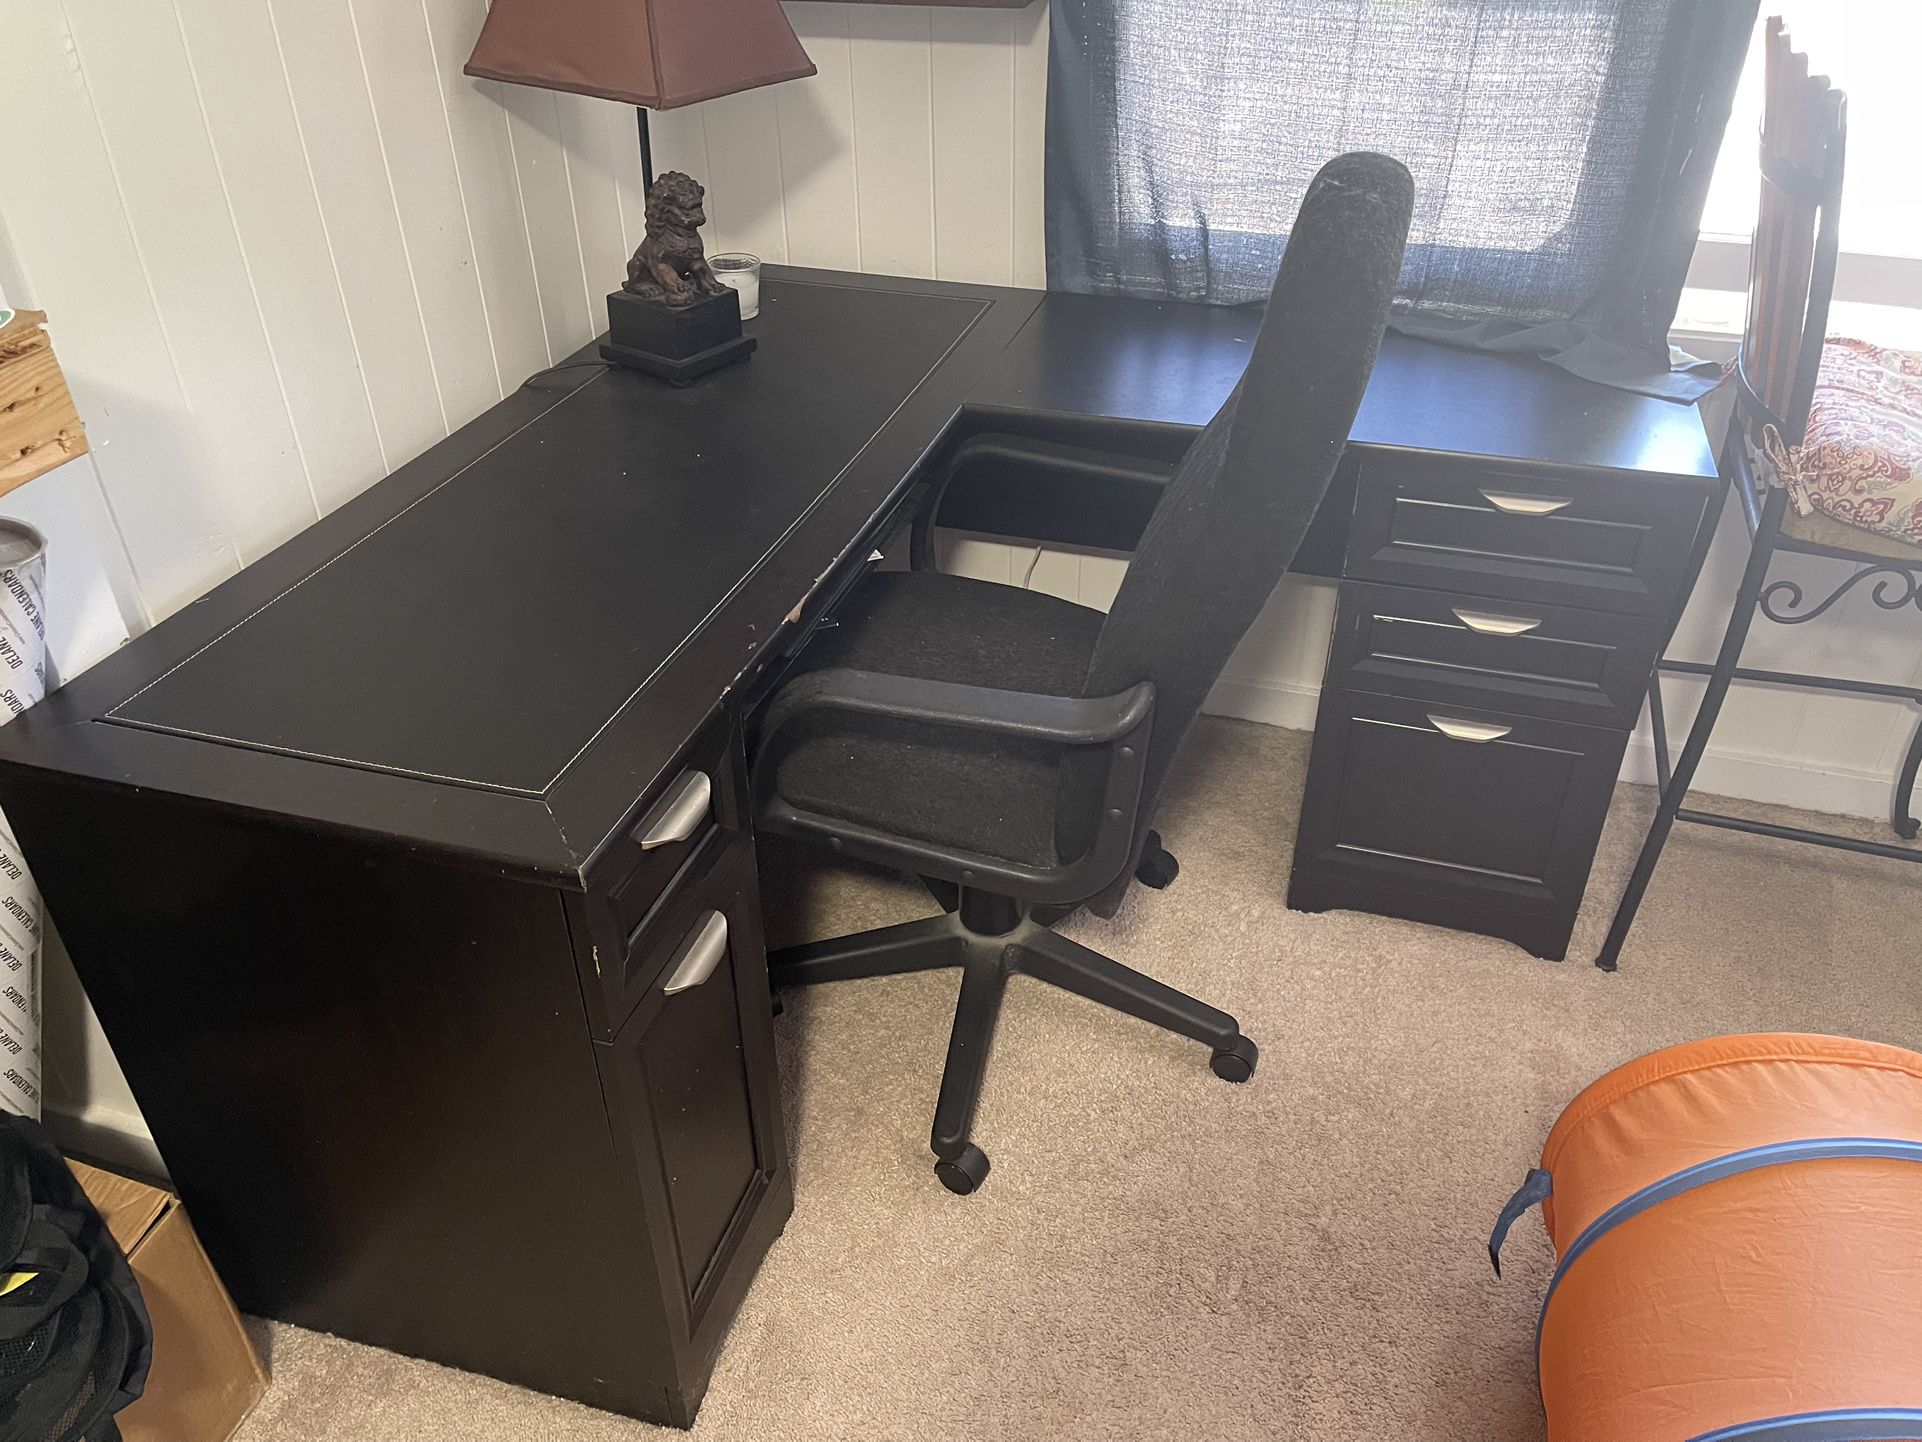 Desk With Free Chair